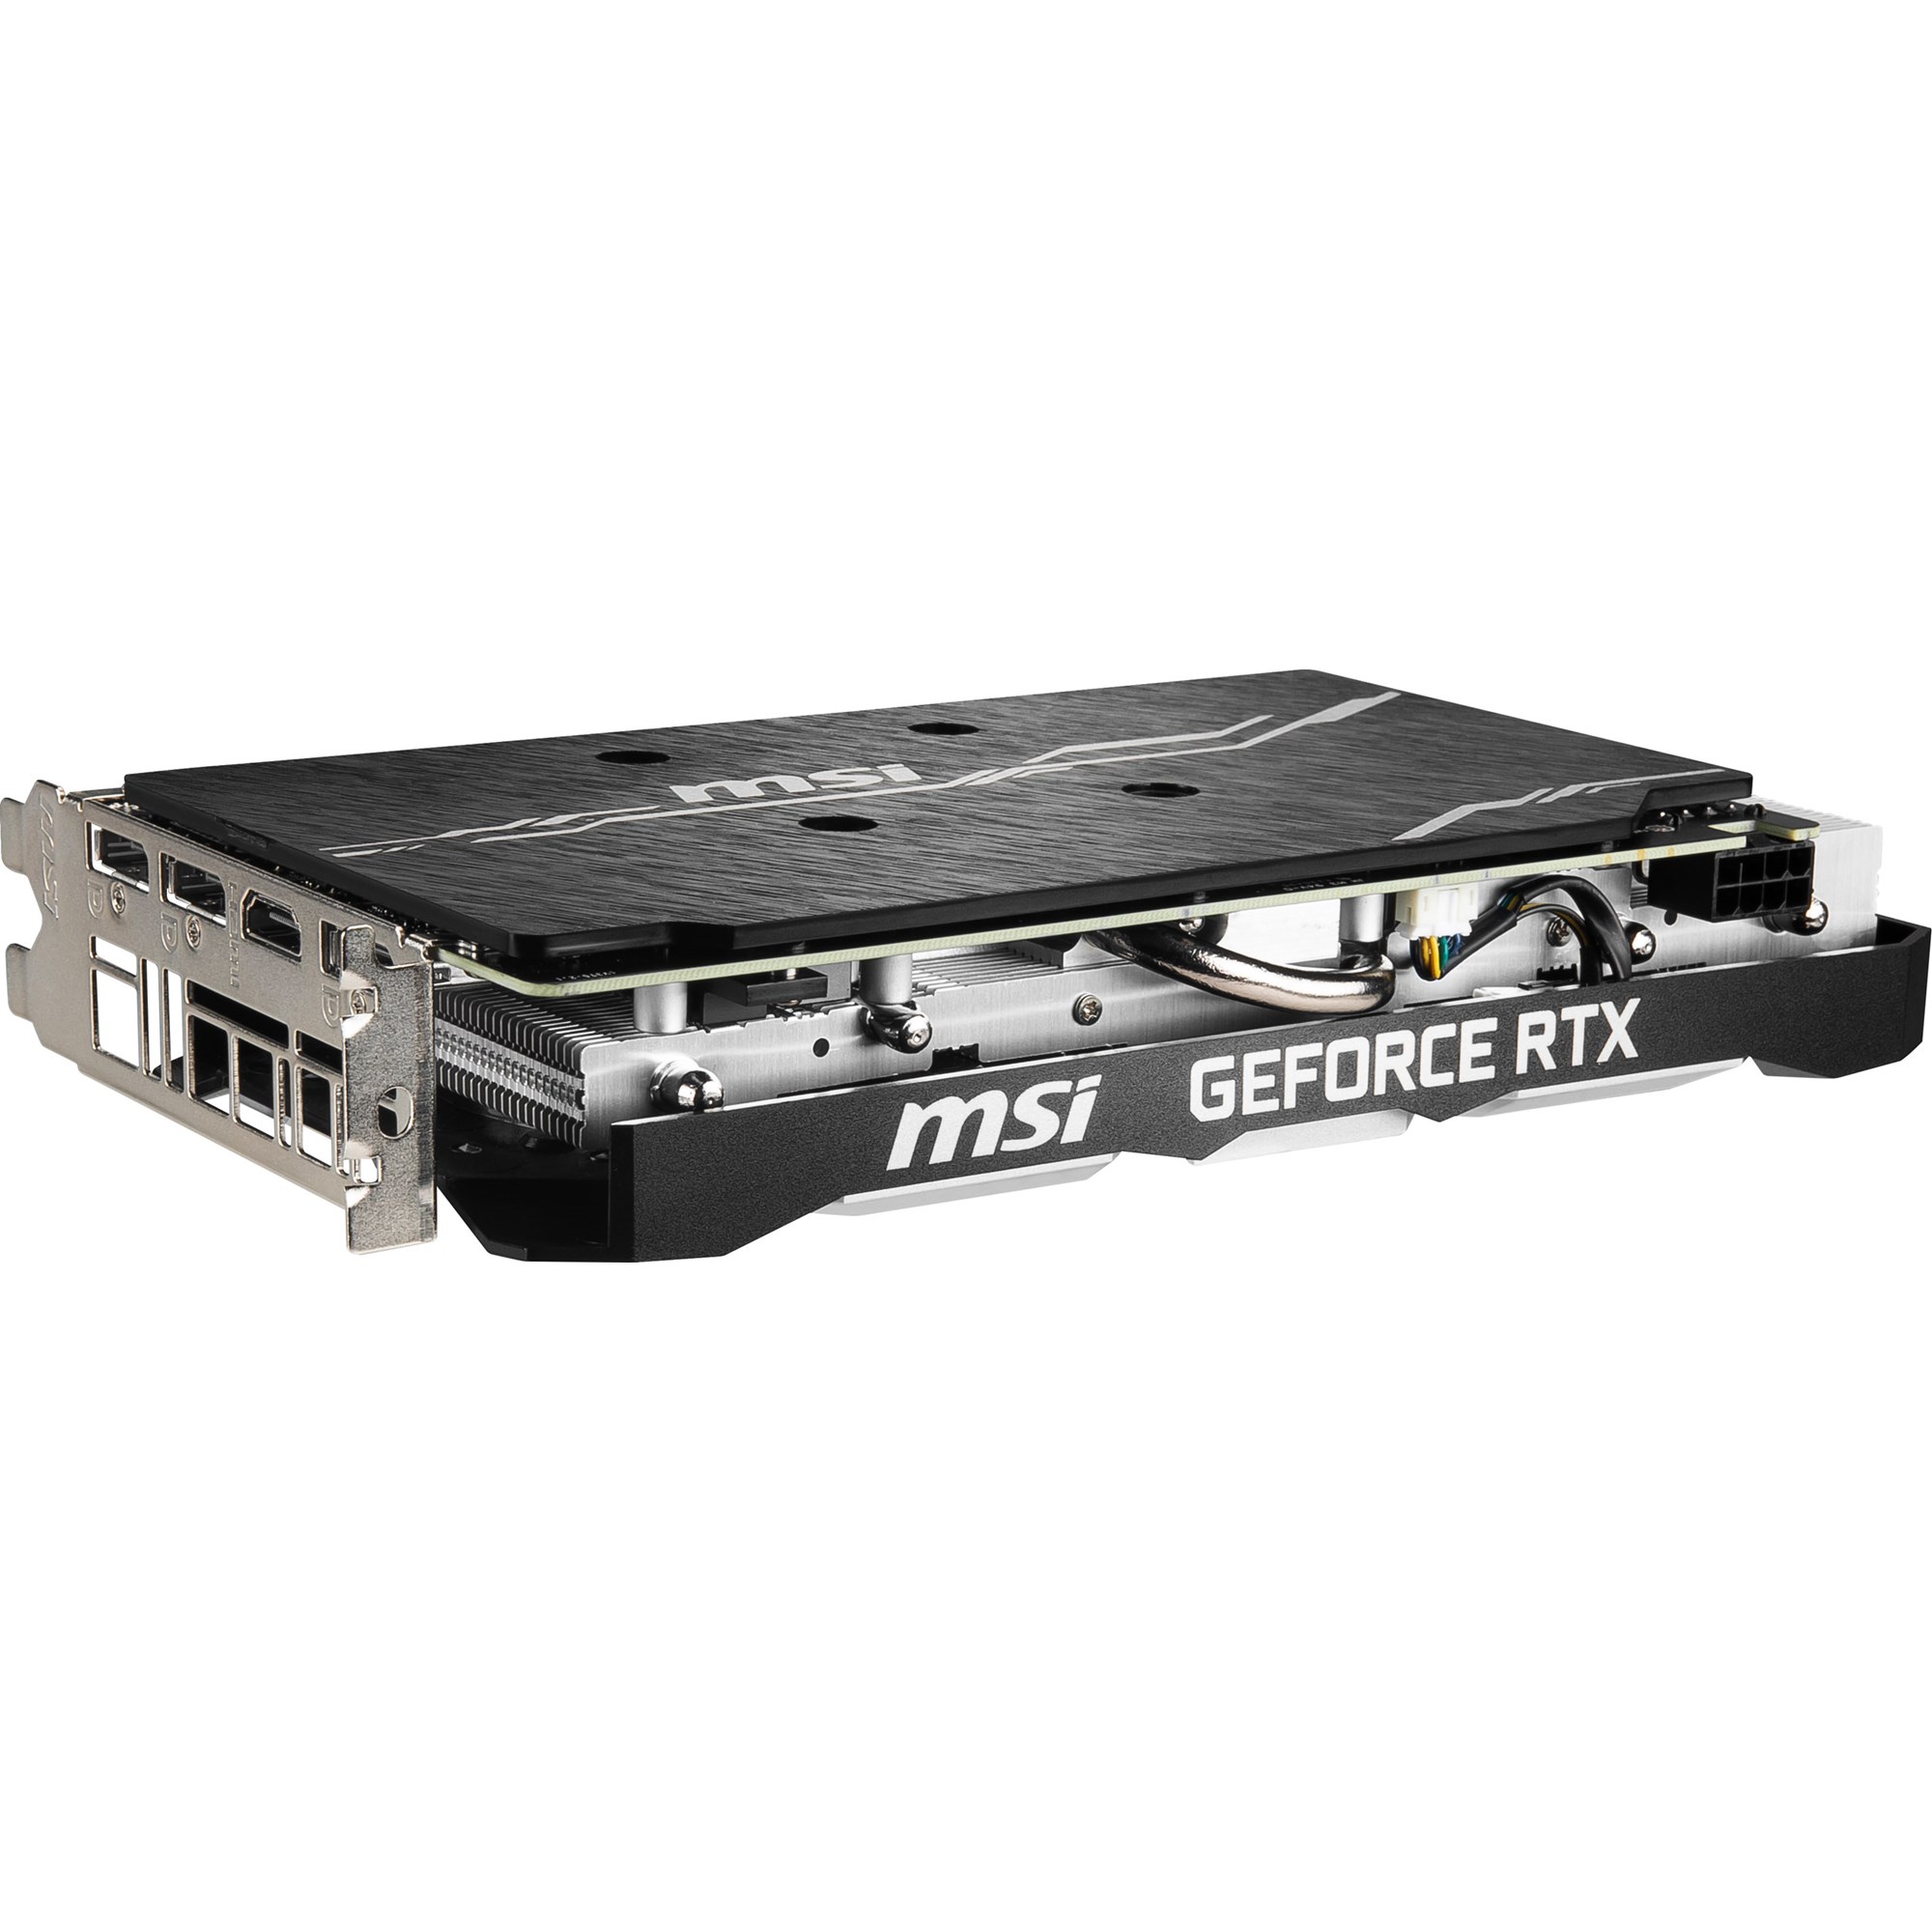 Shop Msi Geforce Rtx 2070 Ventus | UP TO 54% OFF